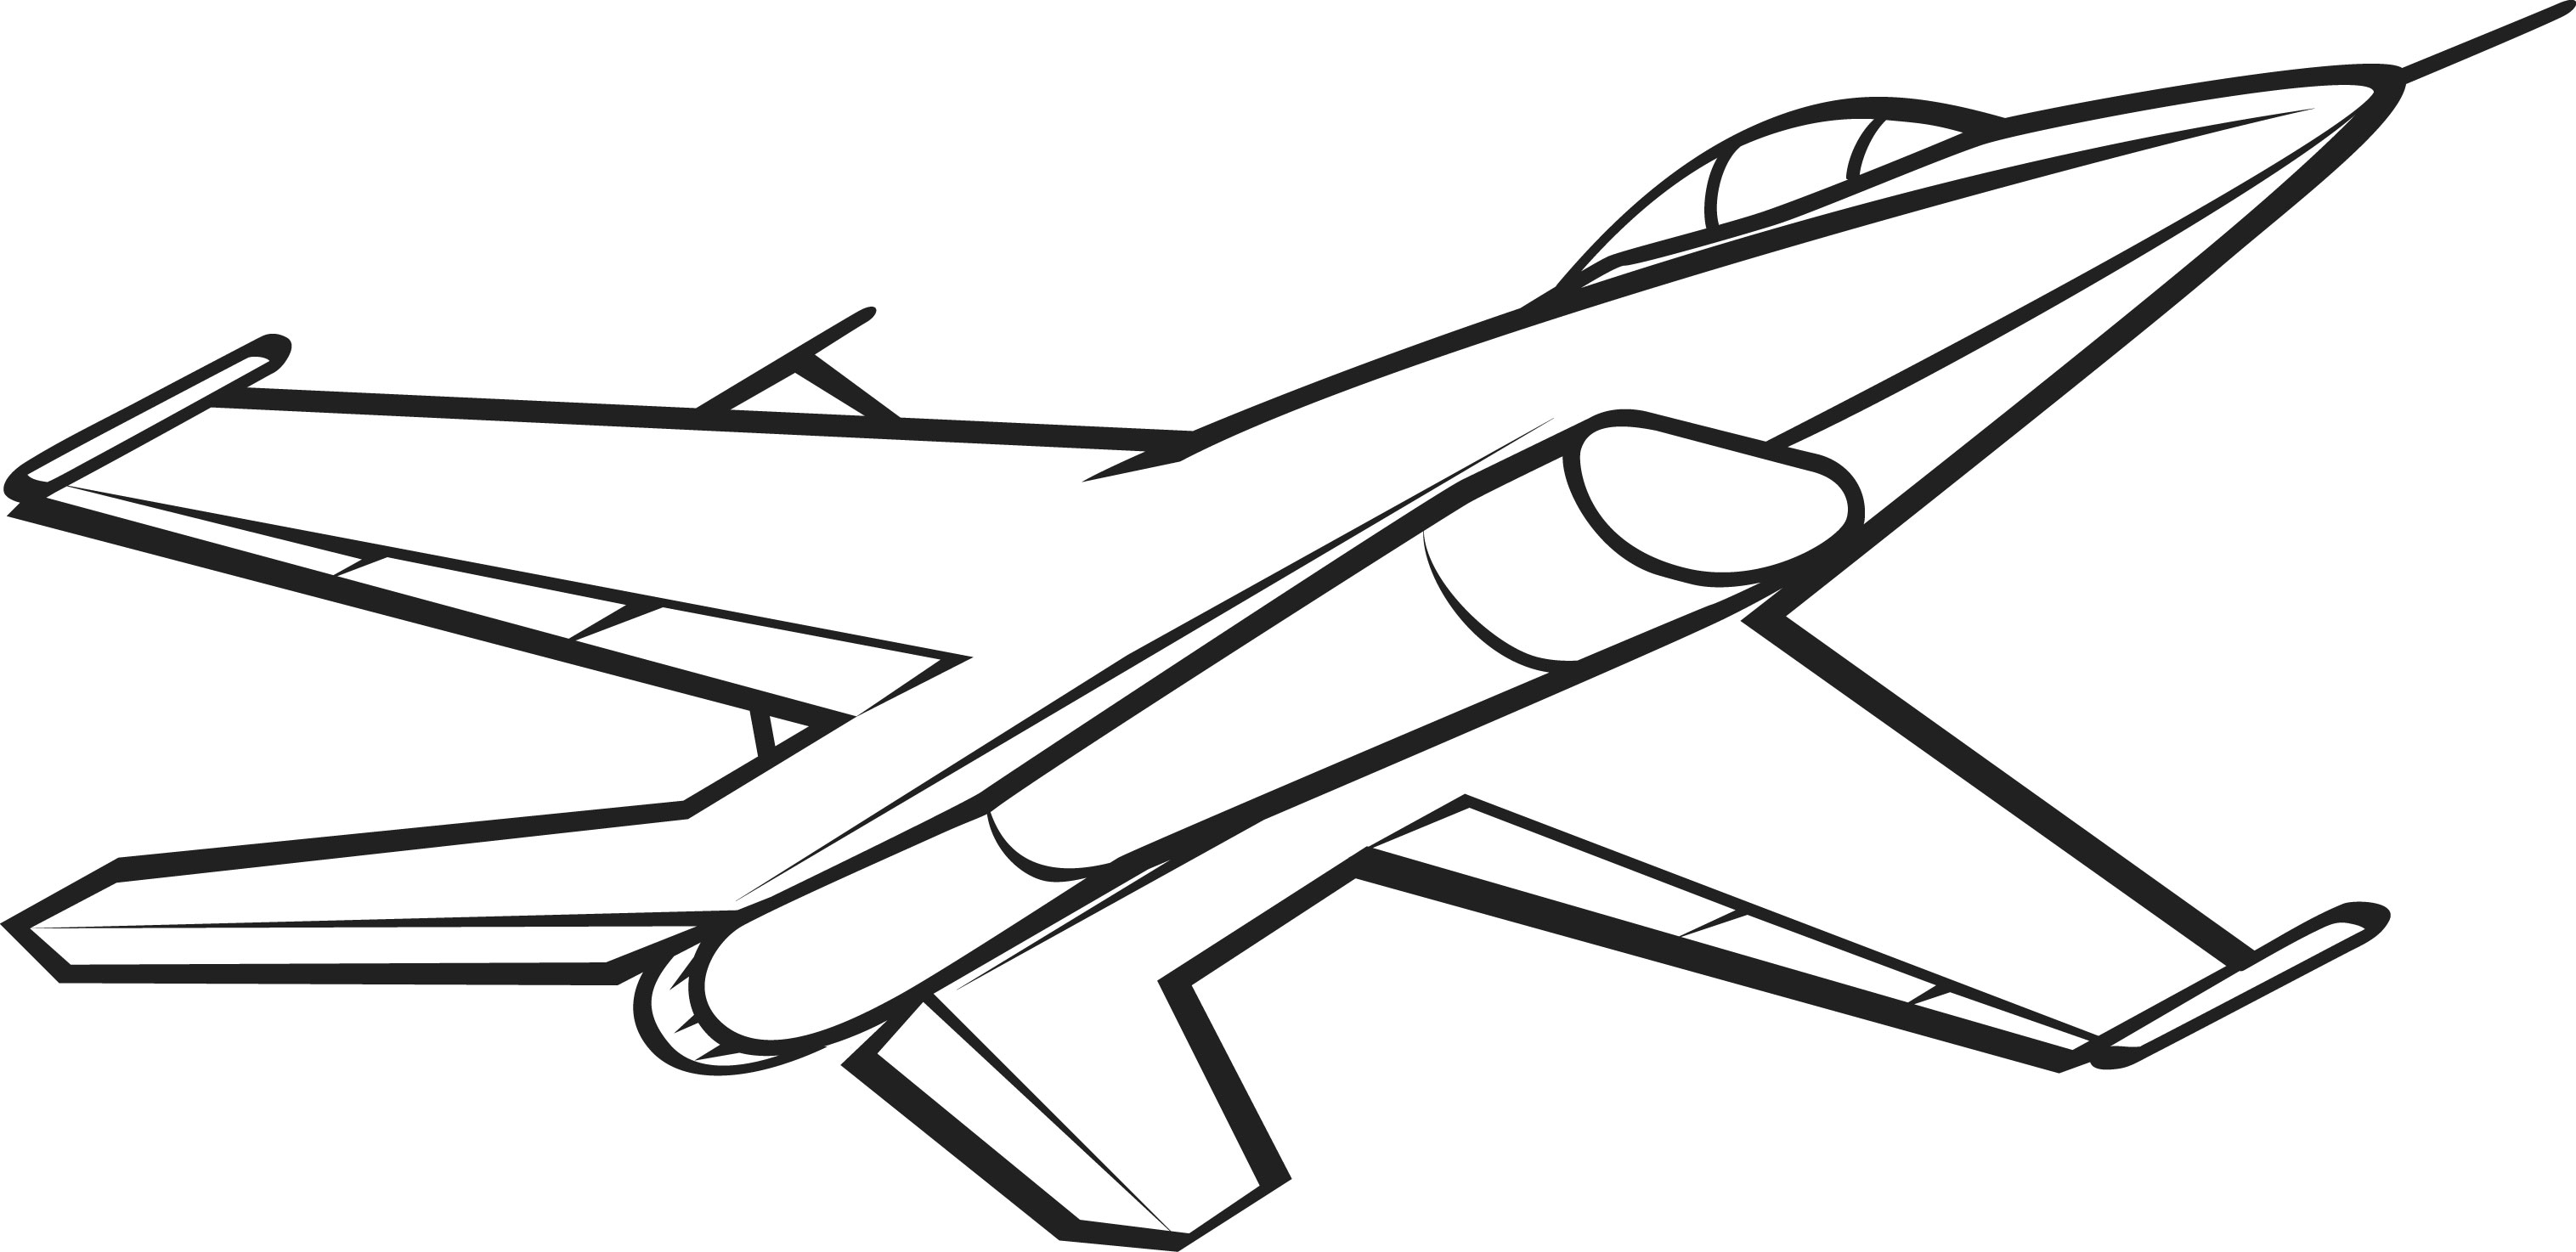 Airplane Clipart Black And White Take Off | Clipart Panda - Free ...